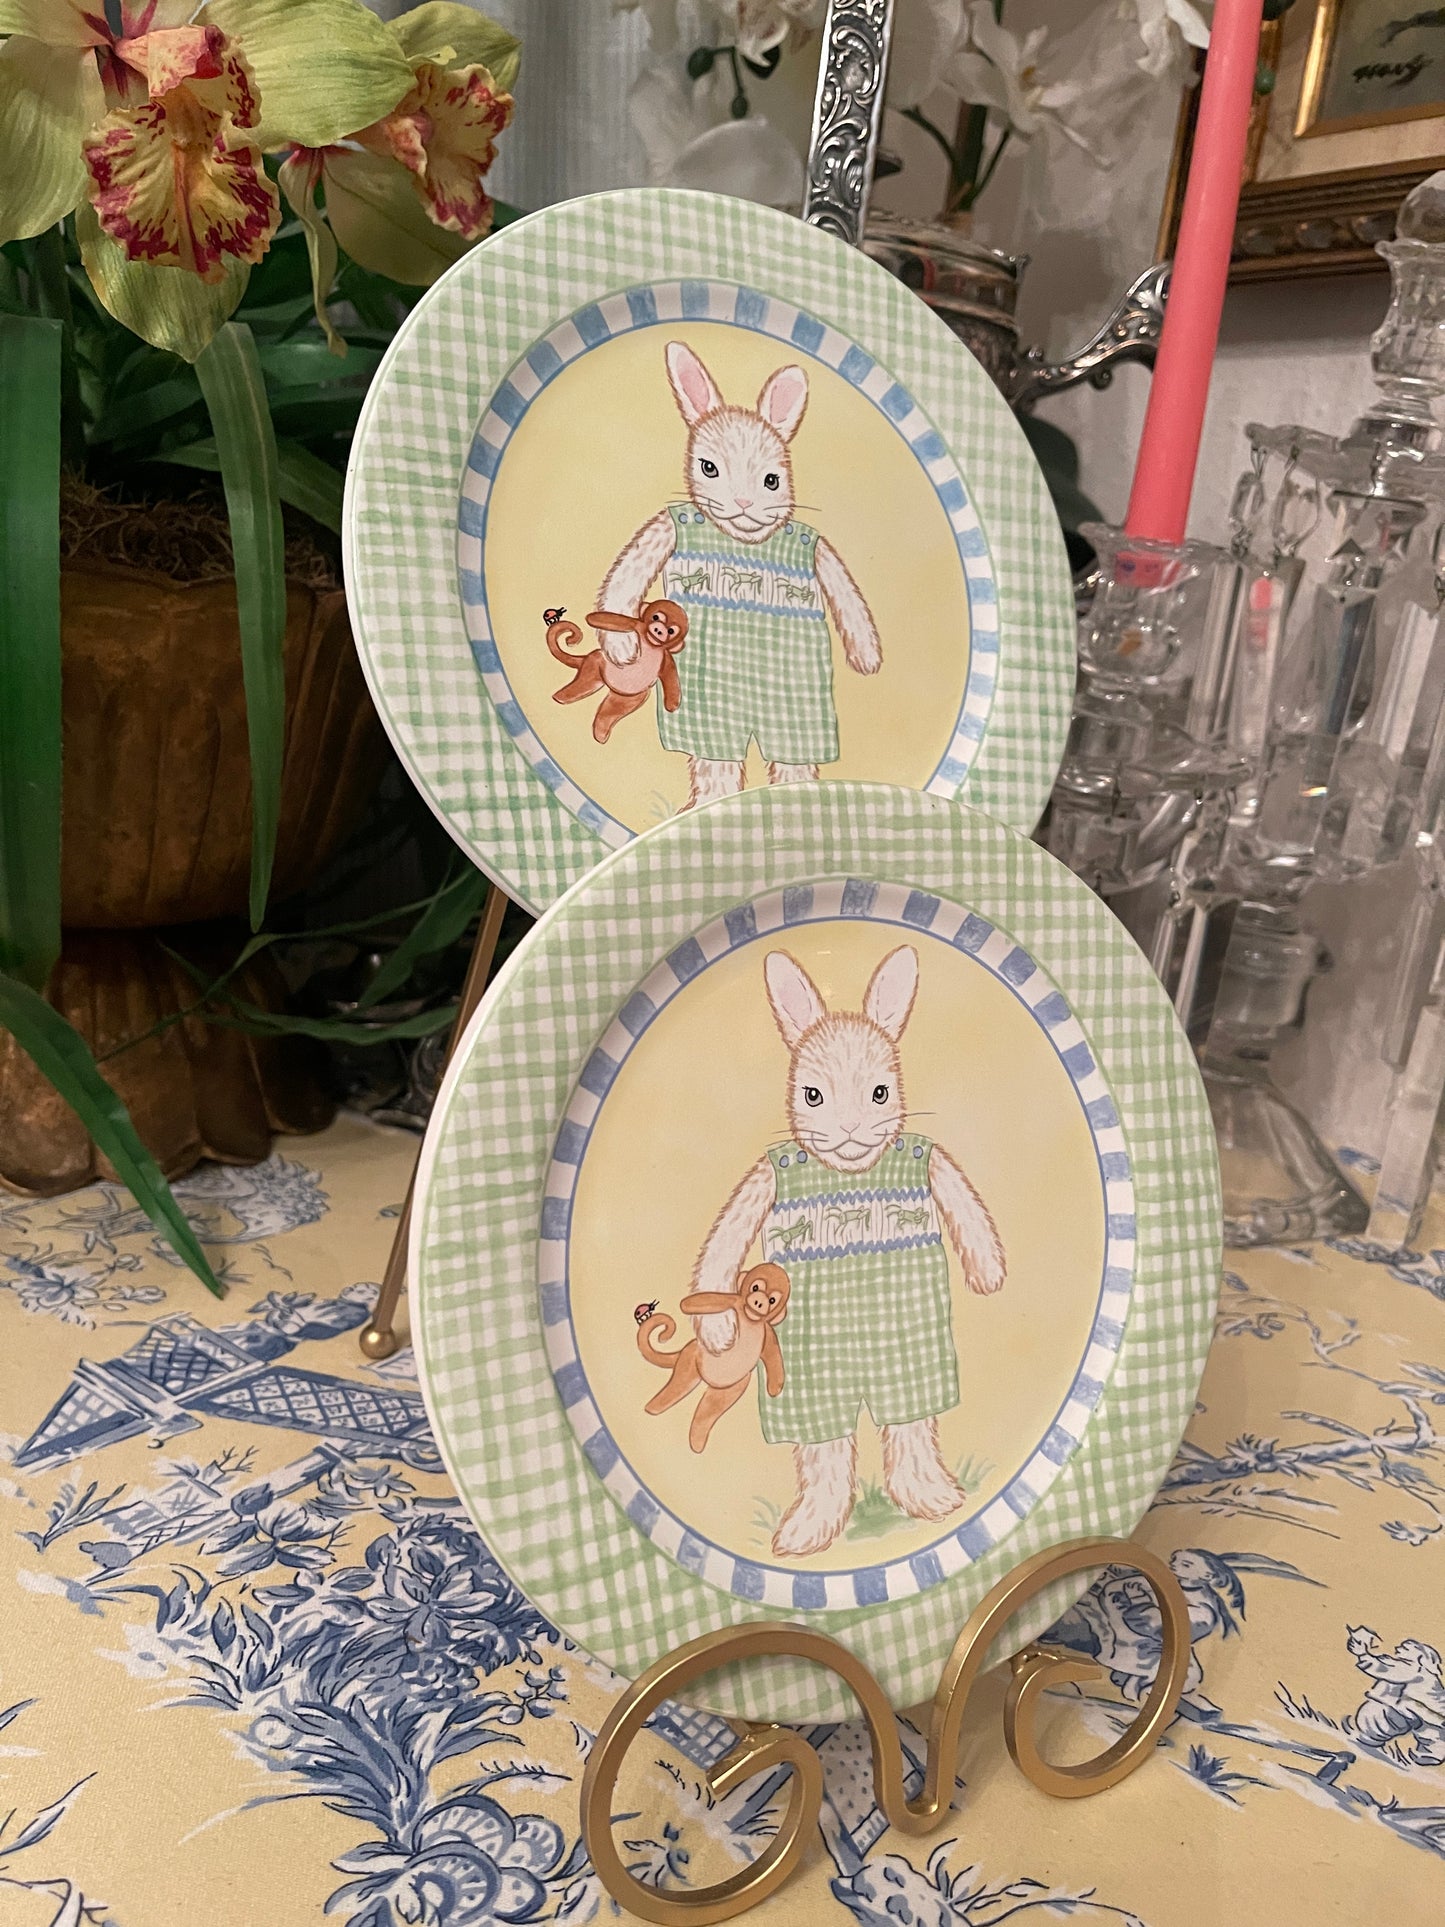 Precious Kelly B Rightsell Bunny in  Smocked Romper Plate - Green, Blue and White- Made in Portugal